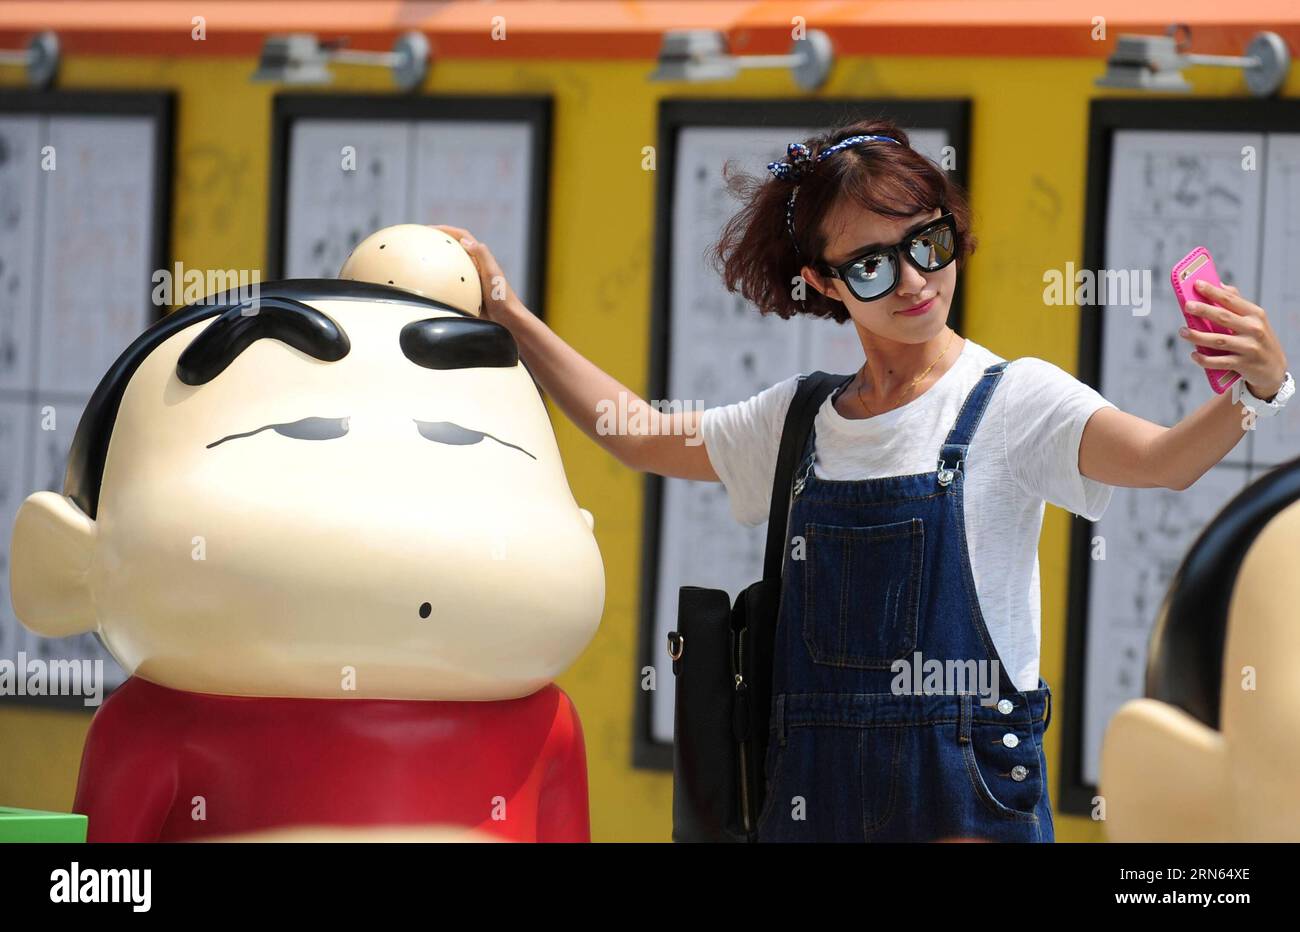 (150711) -- SHENYANG, July 11, 2015 -- A citizen takes a selfie with a figure of Crayon Shin-chan when visiting the exhibition marking the 25th anniversary of Japanese manga series Crayon Shin-chan in Shenyang, northeast China s Liaoning Province July 11, 2015. Dozens of manga and theatrical version of Crayon Shin-chan and related figures were displayed on the exhibition that opened to public on Saturday. (mcg) CHINA-SHENYANG-CRAYON SHIN-CHAN-25TH ANNIVERSARY(CN) ZhangxWenkui PUBLICATIONxNOTxINxCHN   150 711 Shenyang July 11 2015 a Citizen Takes a Selfie With a Figure of crayon Shin Chan When Stock Photo